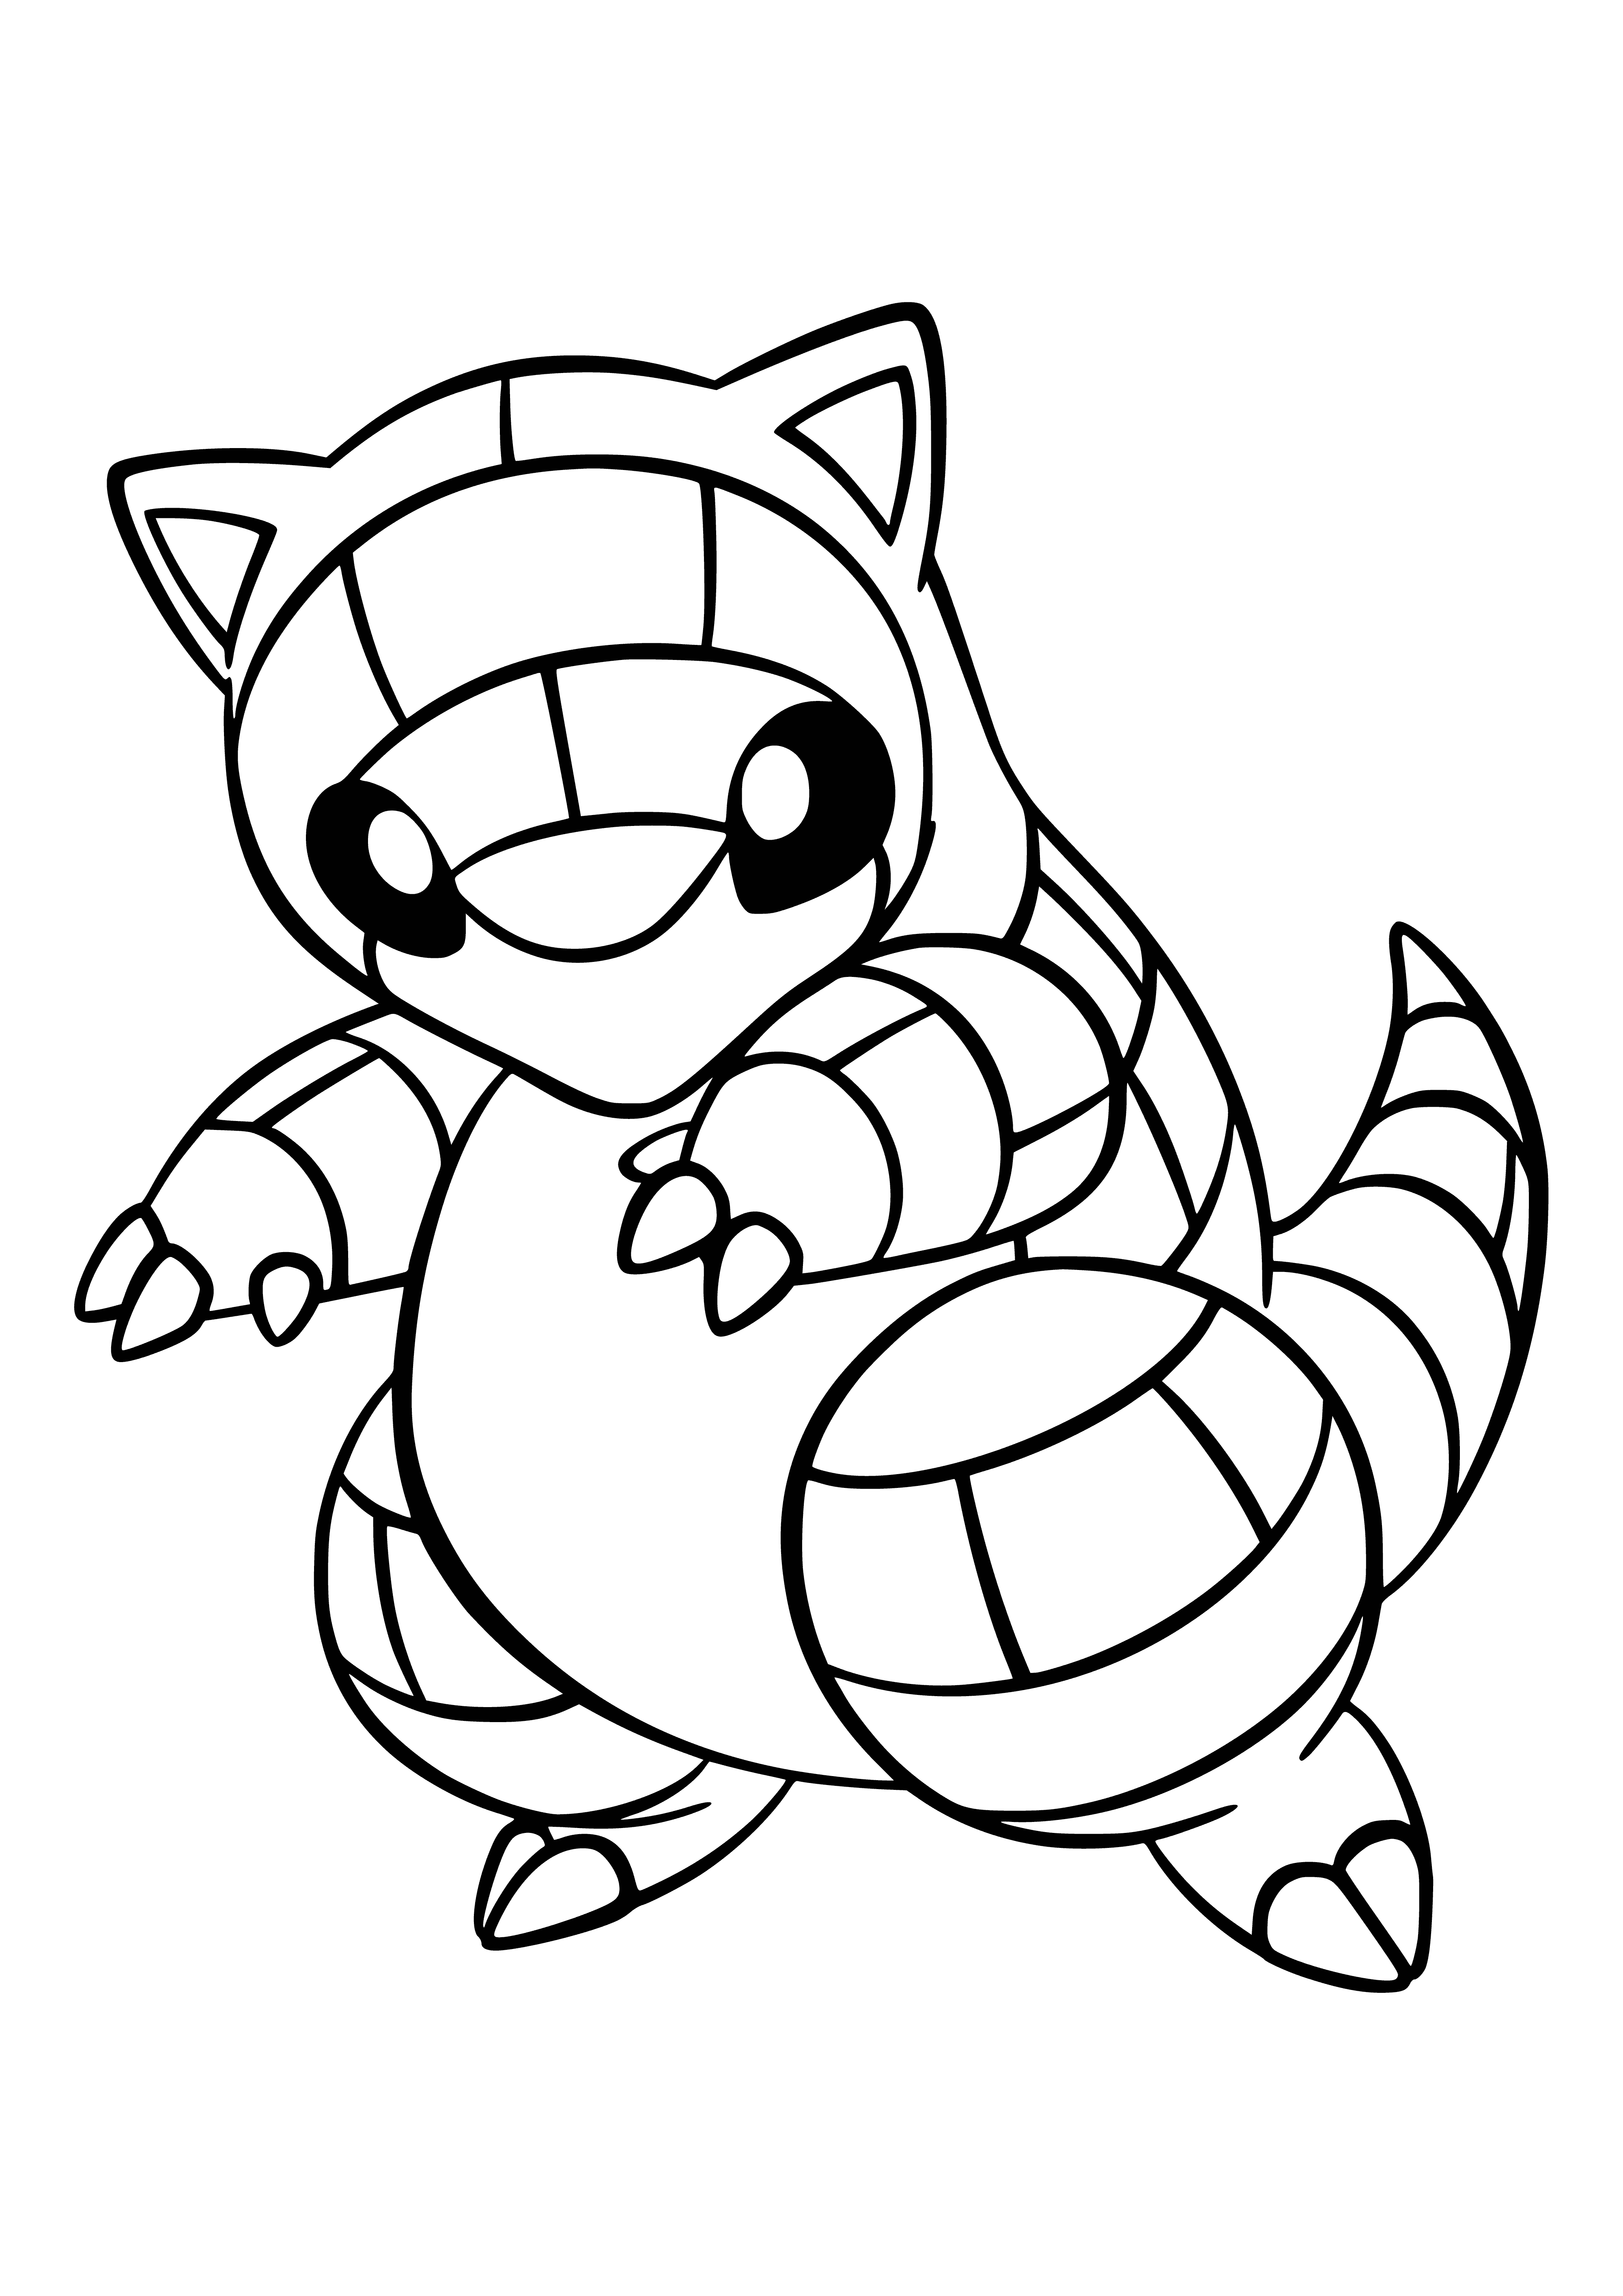 coloring page: Pokemon Sandshrew: Gray, rodent-like Pokemon w/ short stubby tail & large head. 3 clawed toes on each foot. Black eyes & forelegs longer than hind legs.